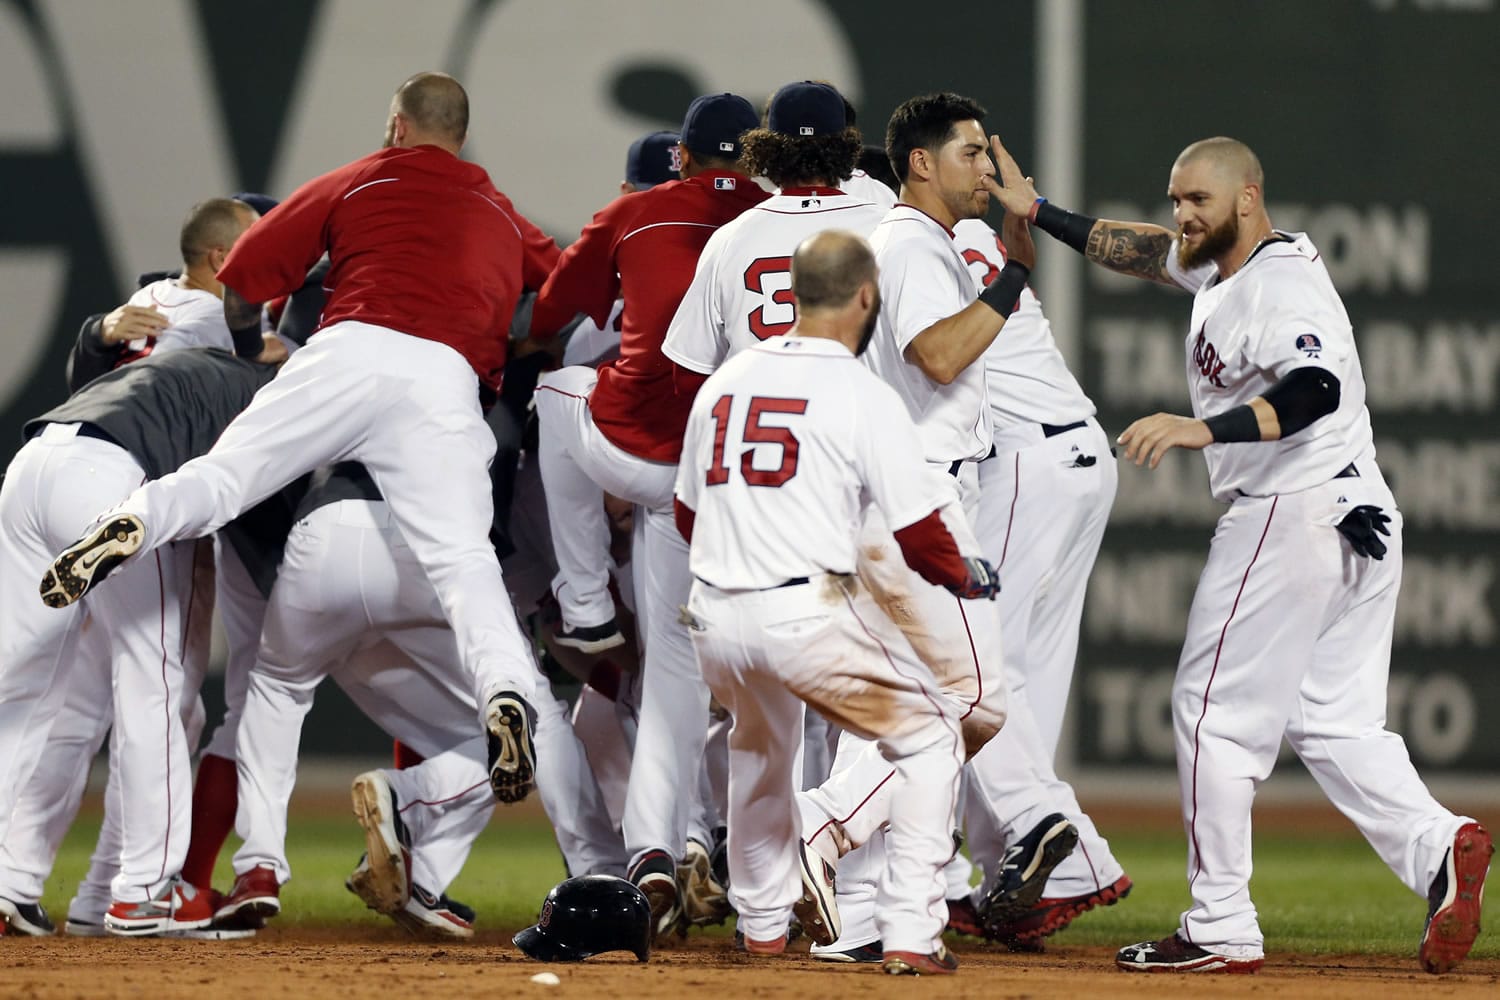 The Boston Red Sox including Jonny Gomes, right, Jacoby Ellsbury, second from right, and Dustin Pedroia celebrate after a walkoff-single by Daniel Nava that scored Pedroia in the ninth inning Thursday.